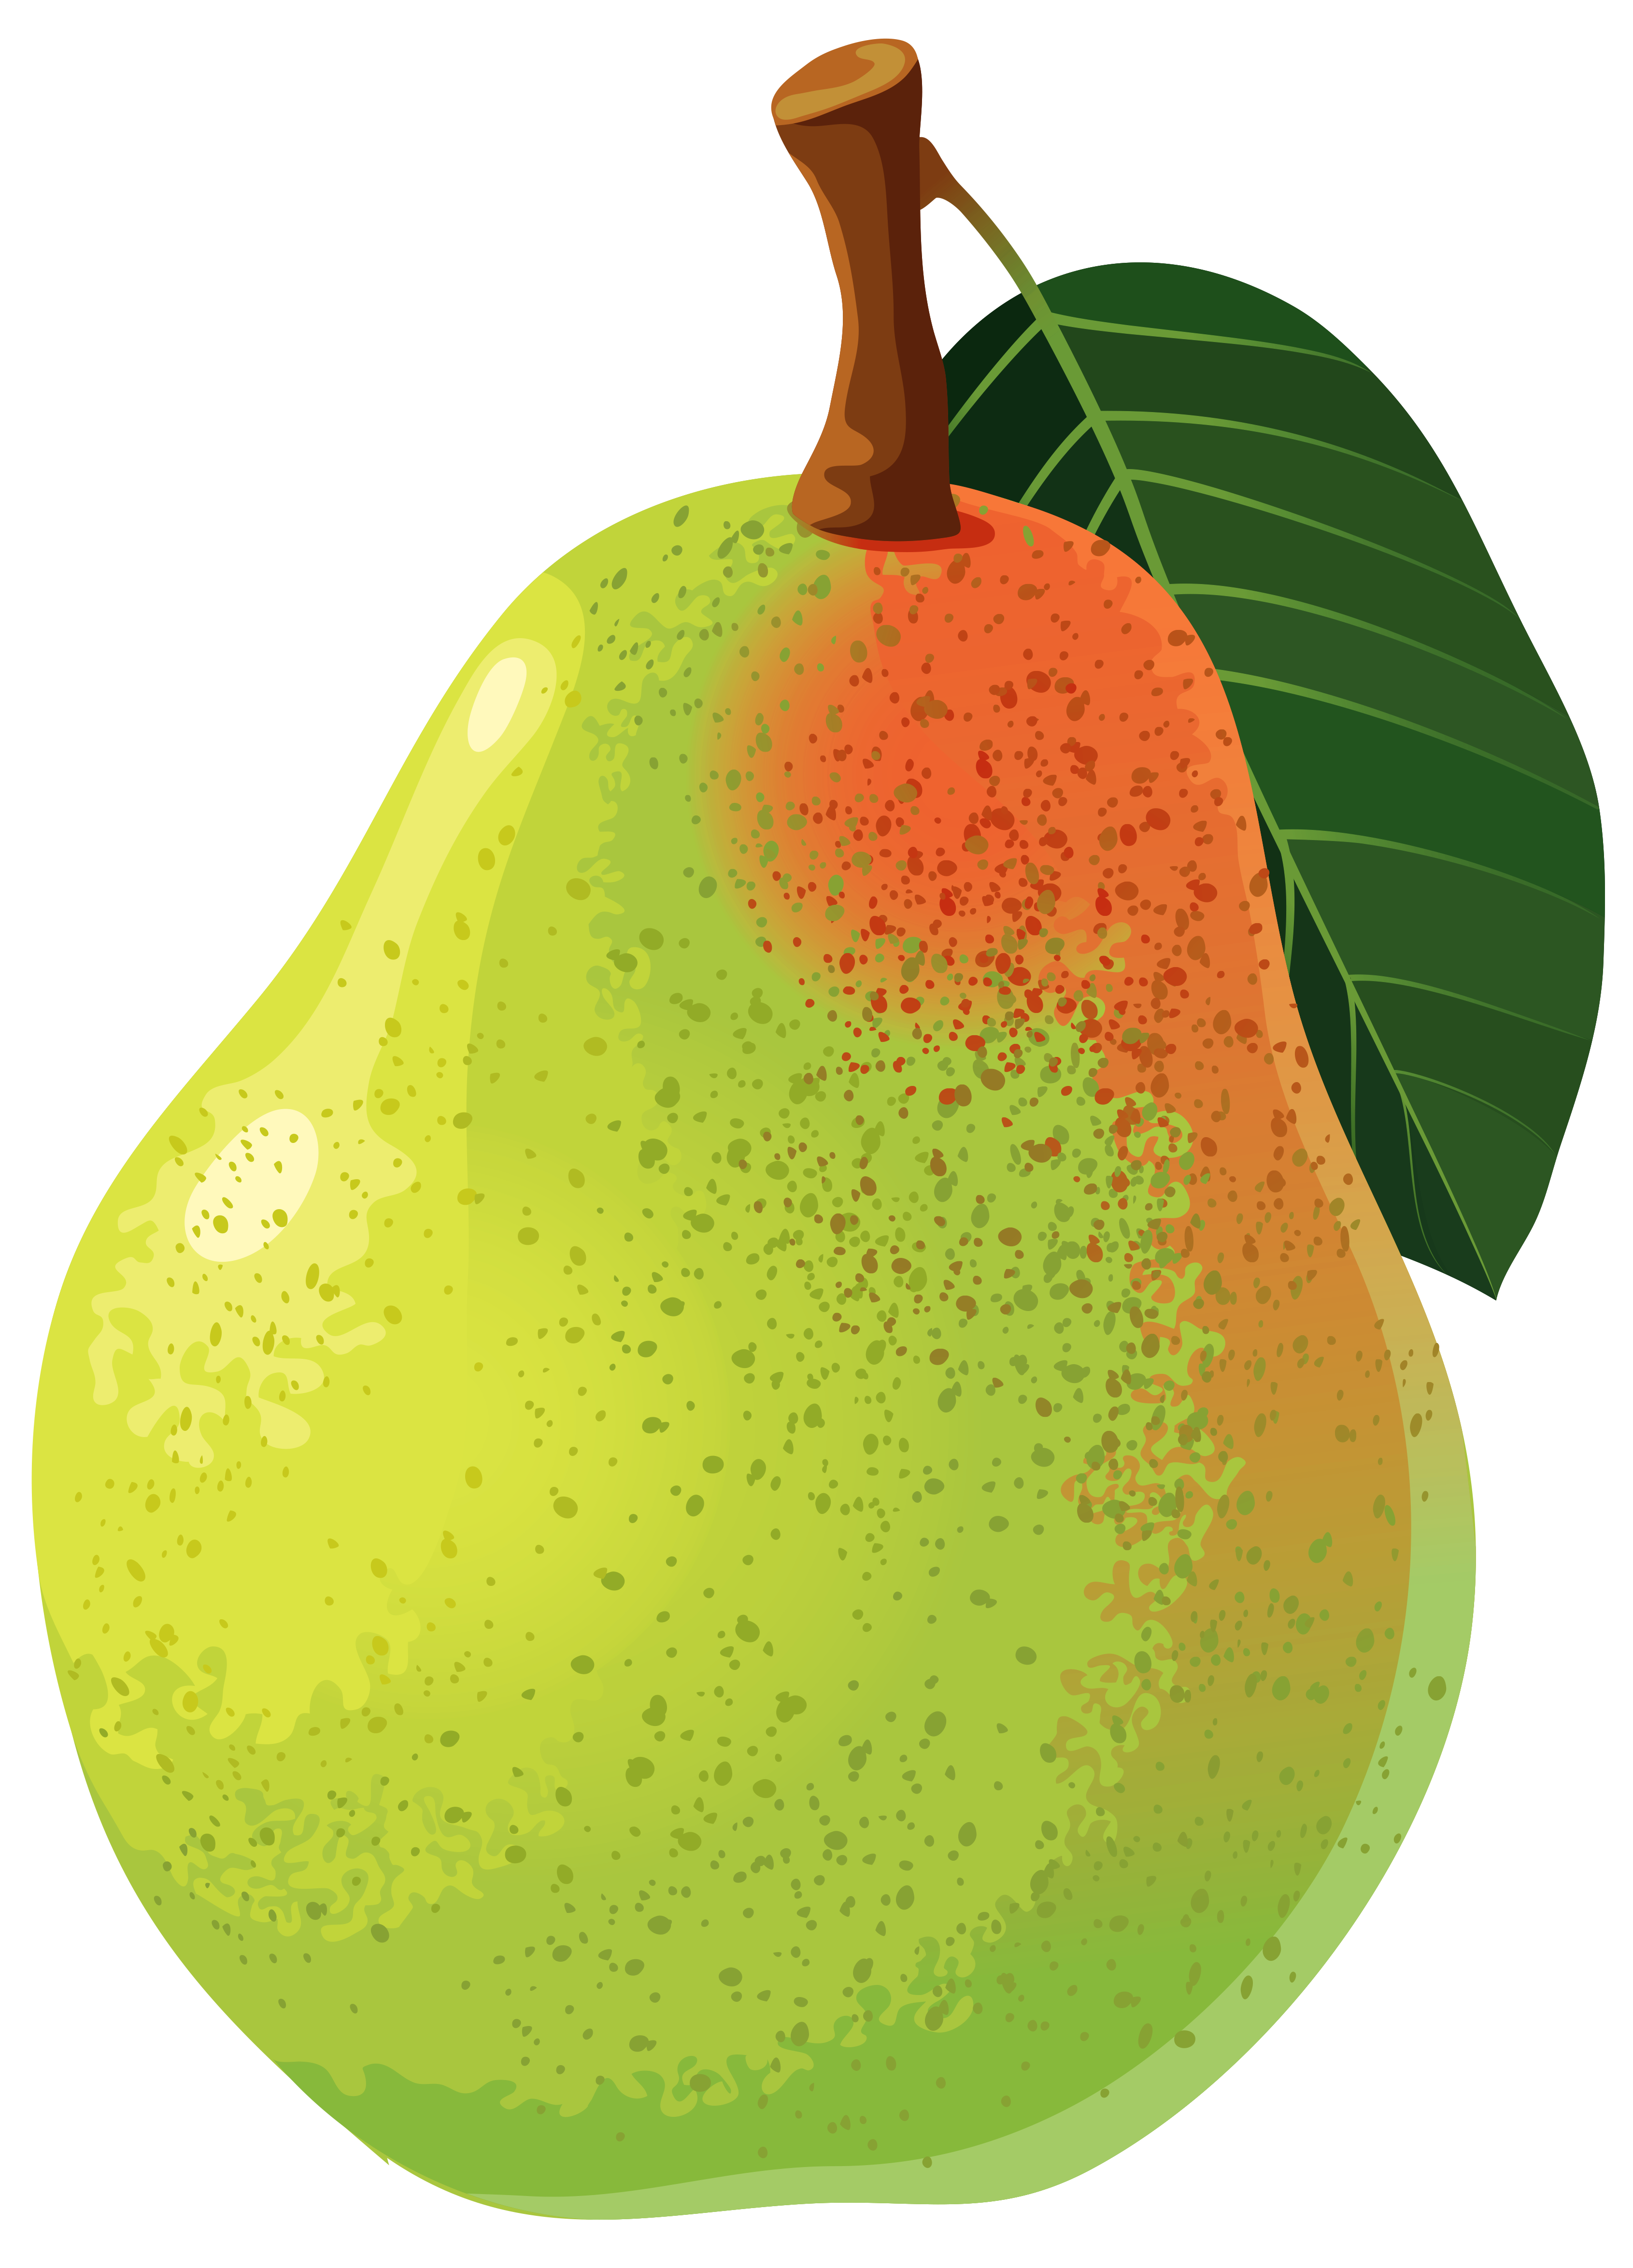 Pear clipart - Clipground